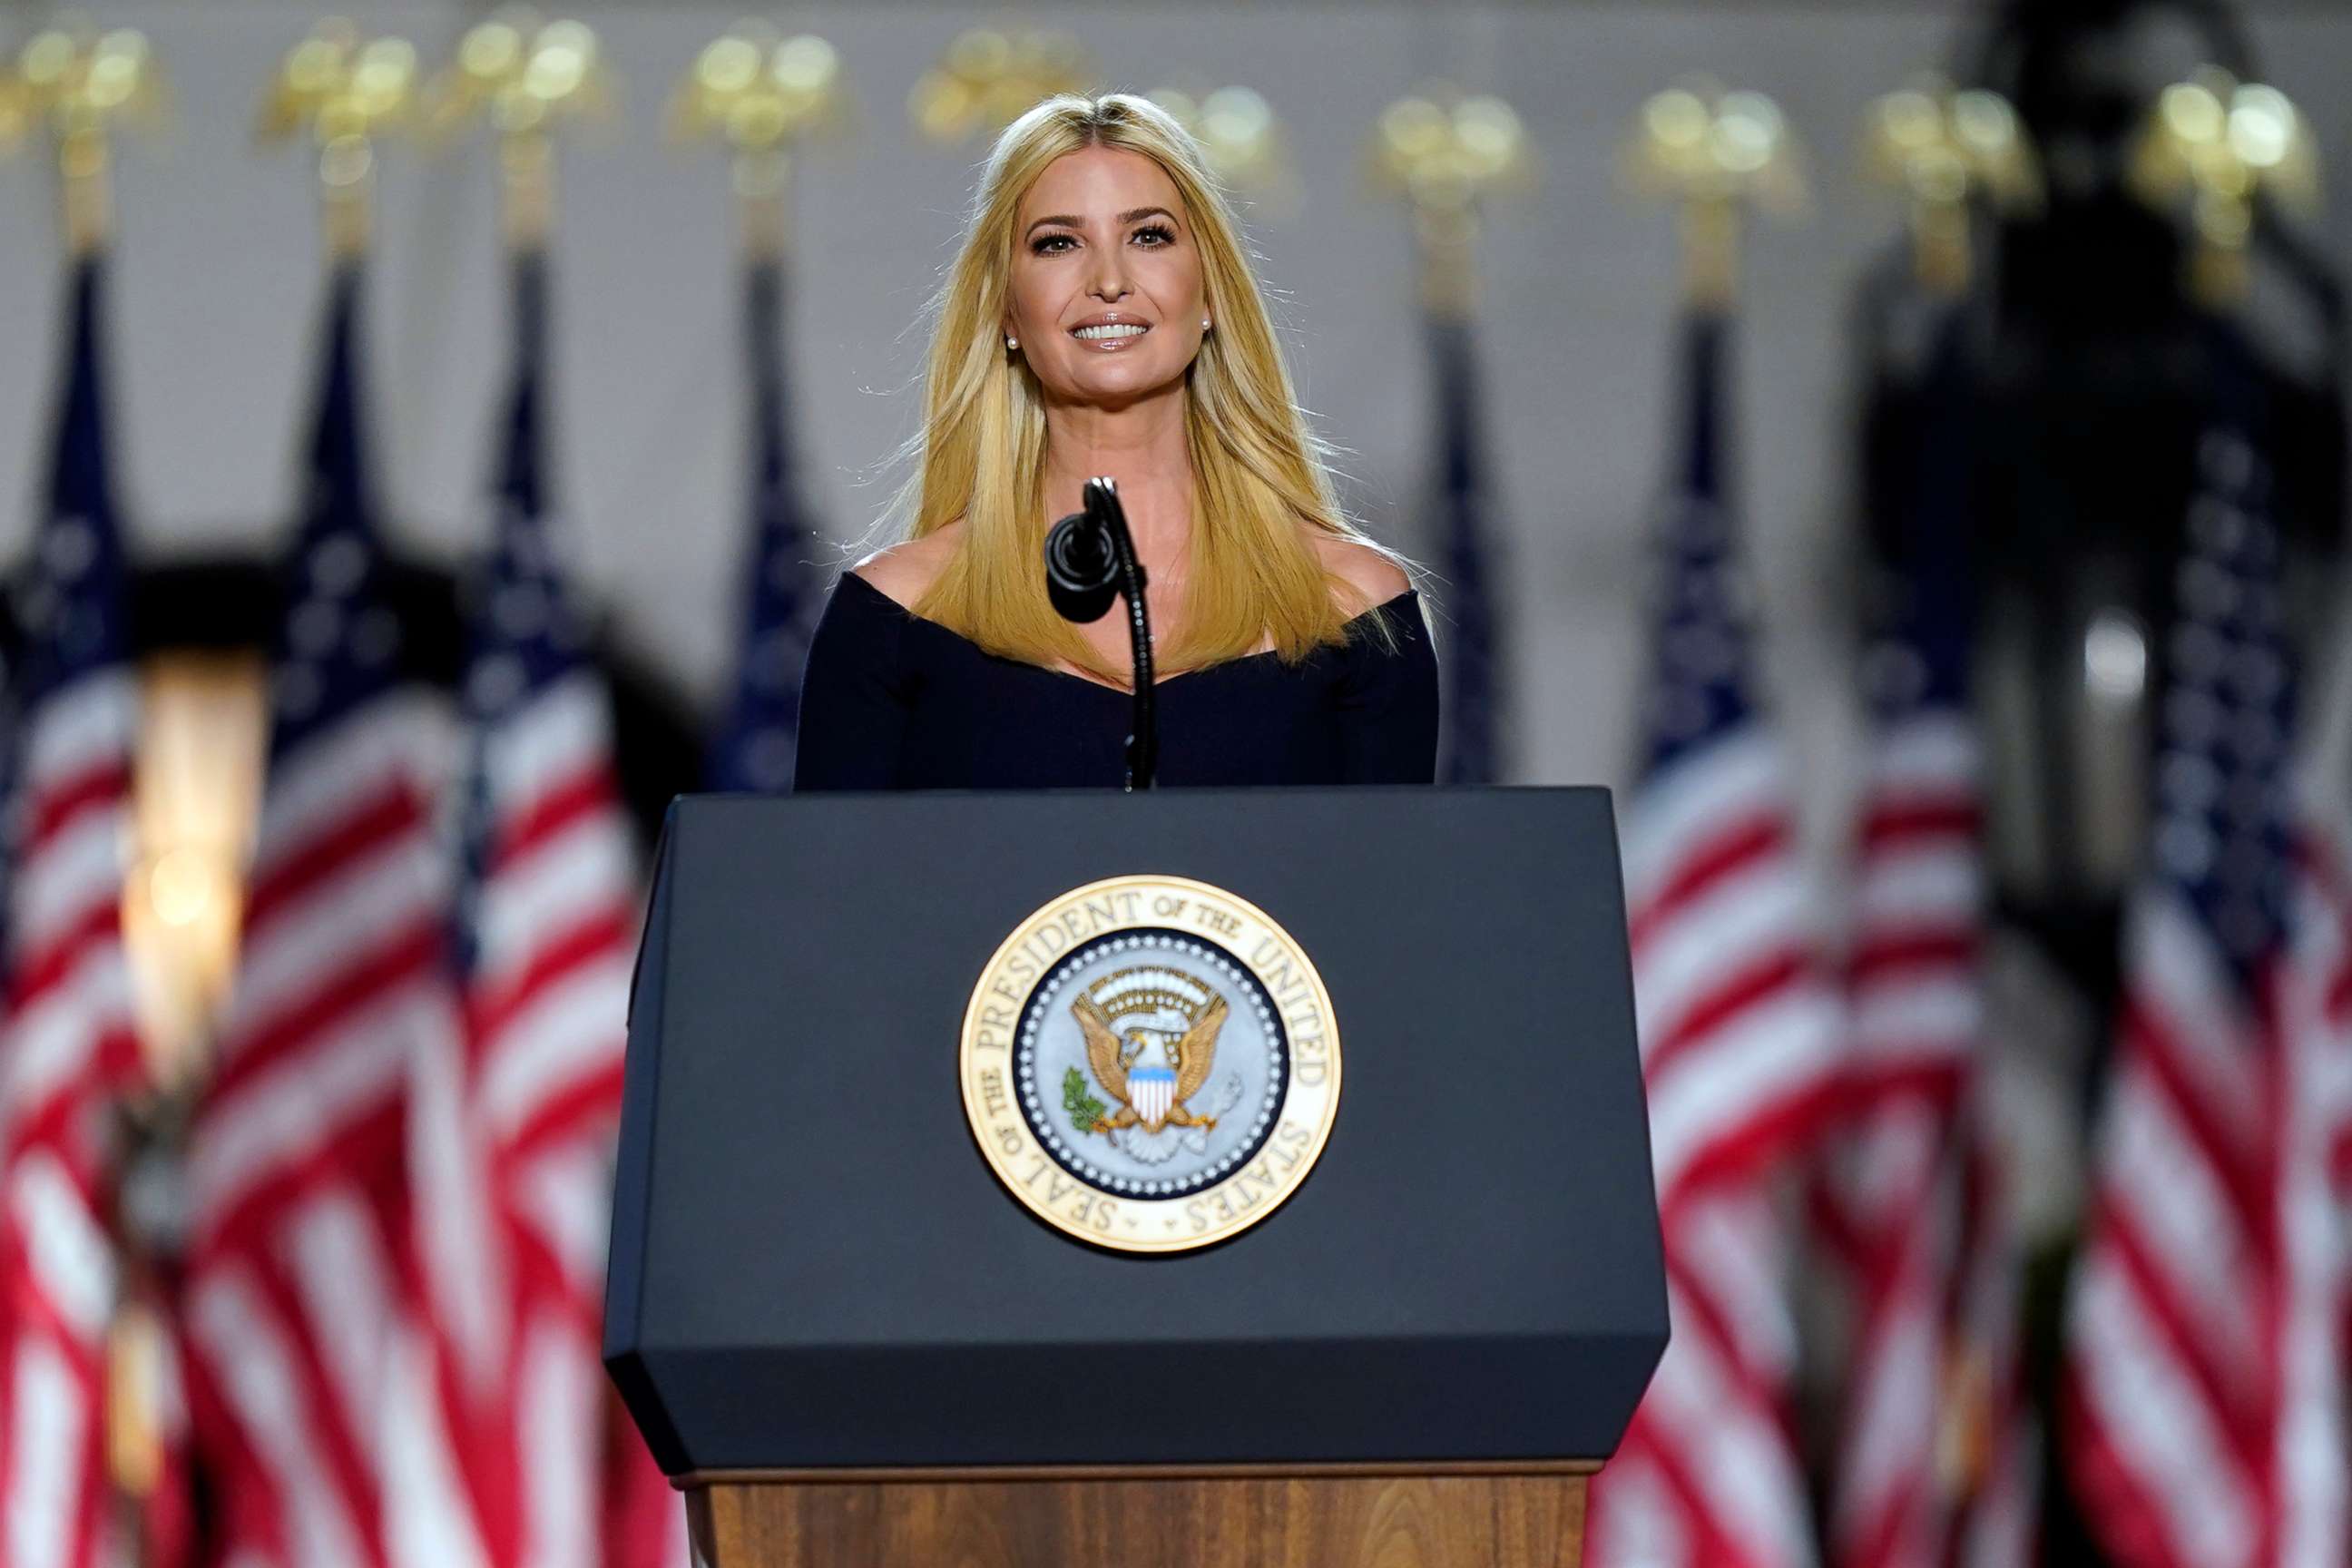 PHOTO: Ivanka Trump speaks from the South Lawn of the White House on the fourth day of the Republican National Convention, Aug. 27, 2020, in Washington.